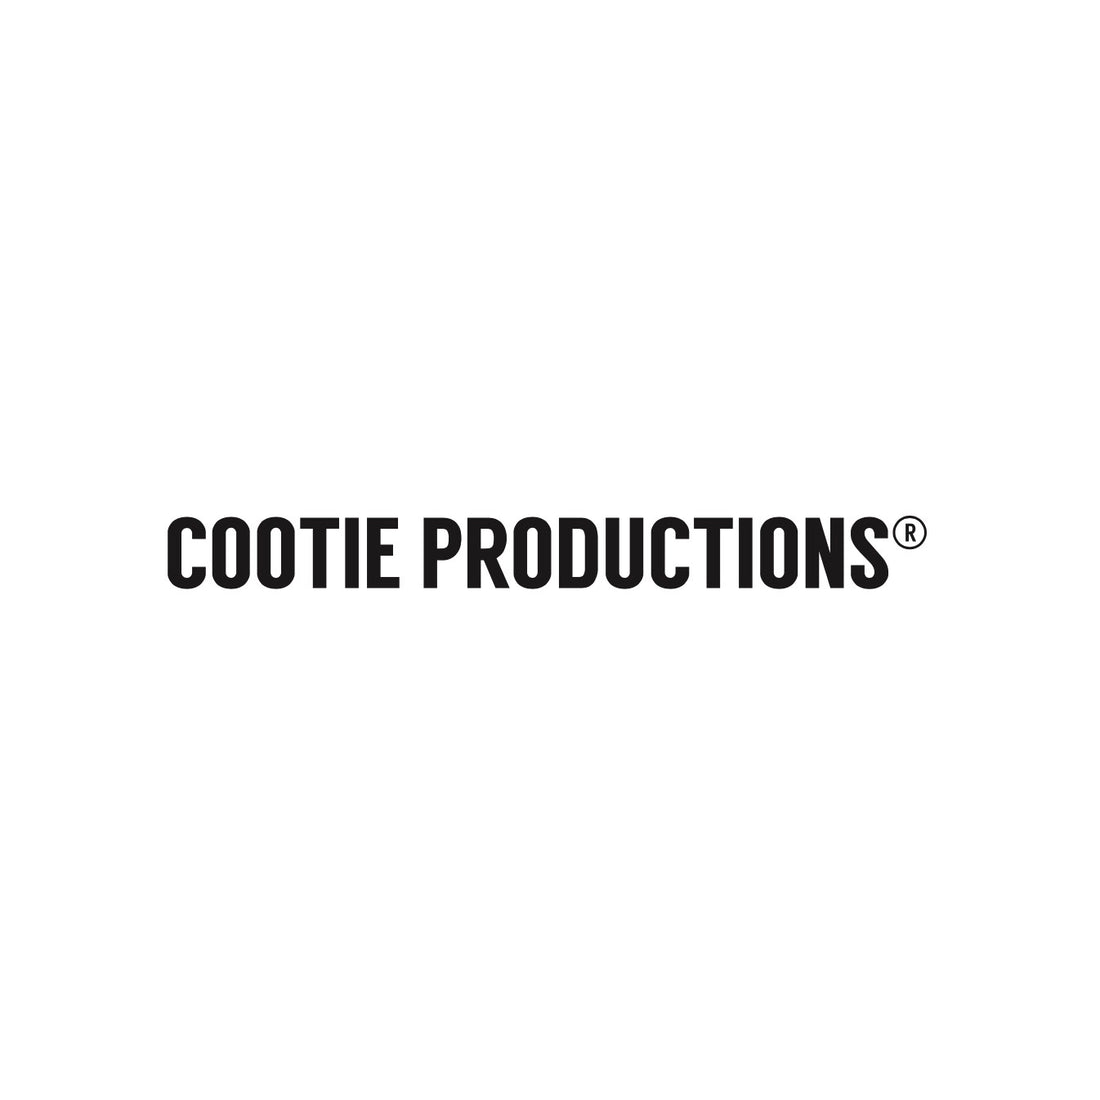 【TAT 2階】  COOTIE PRODUCTIONS / NEW YEARS SPECIAL ITEM 2023年 1月2日 月曜日 12:00 発売開始!!!